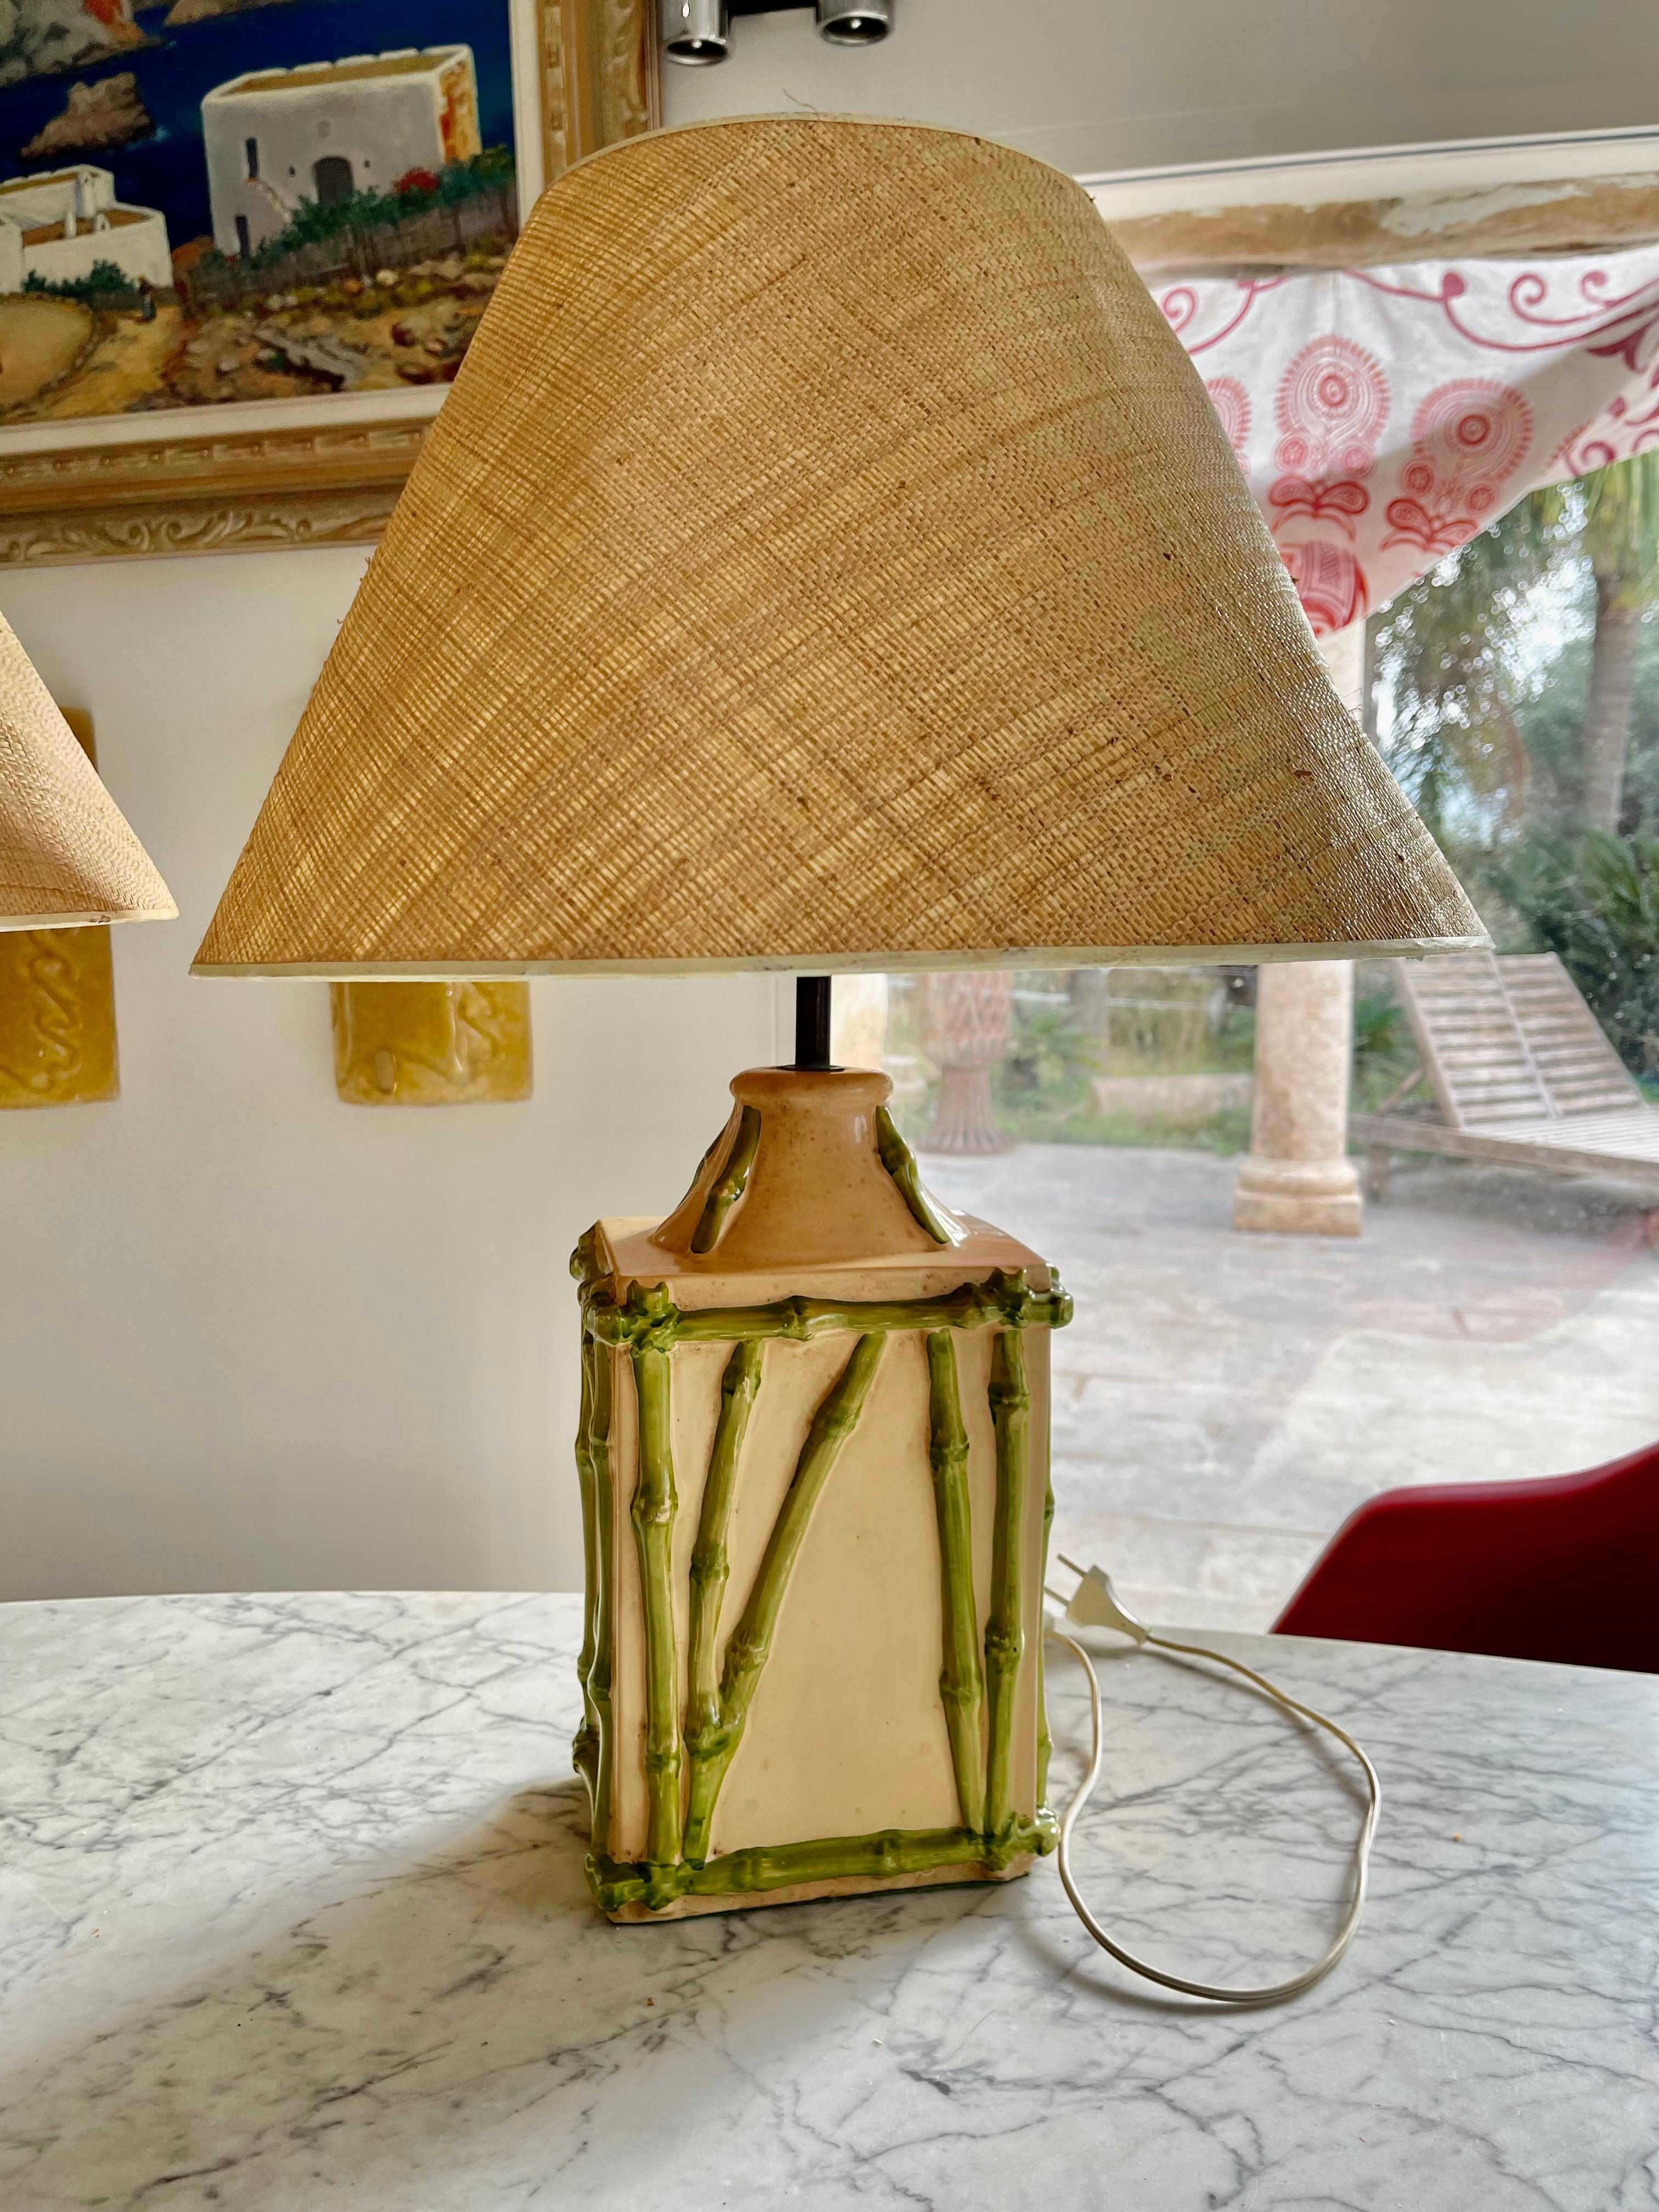 Hollywood Regency style, faux bamboo French ceramic table lamp Pair with green painted faux-bamboo trim circa 1970s. Please note of wear consistent with age including paint loss on the base.